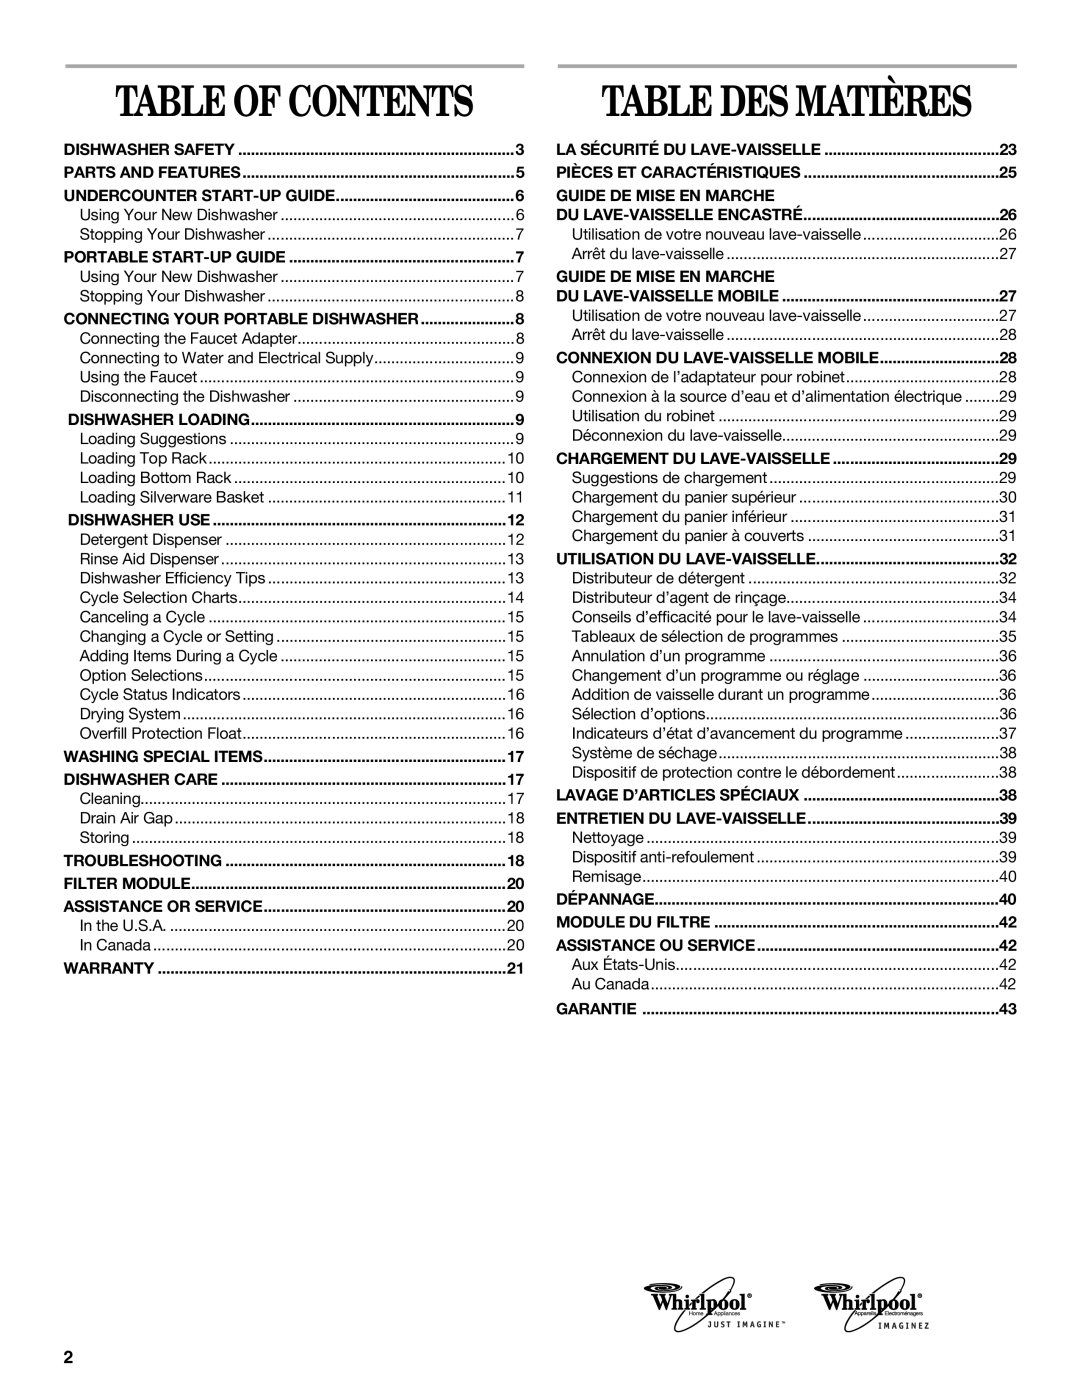 Whirlpool 945, 941 manual Table Des Matières, Table Of Contents 